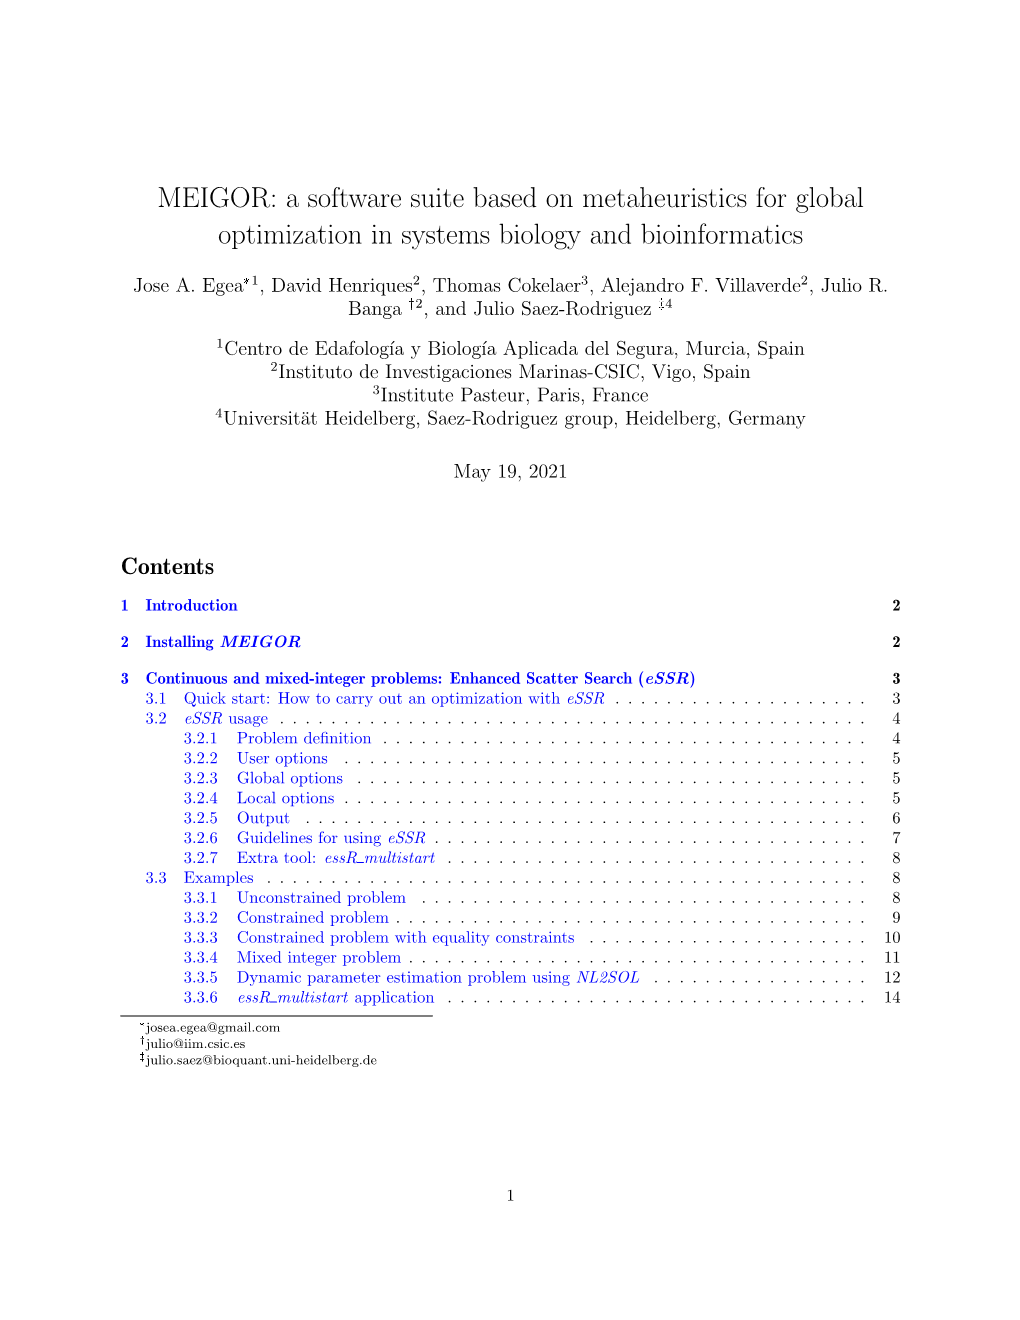 MEIGOR: a Software Suite Based on Metaheuristics for Global Optimization in Systems Biology and Bioinformatics